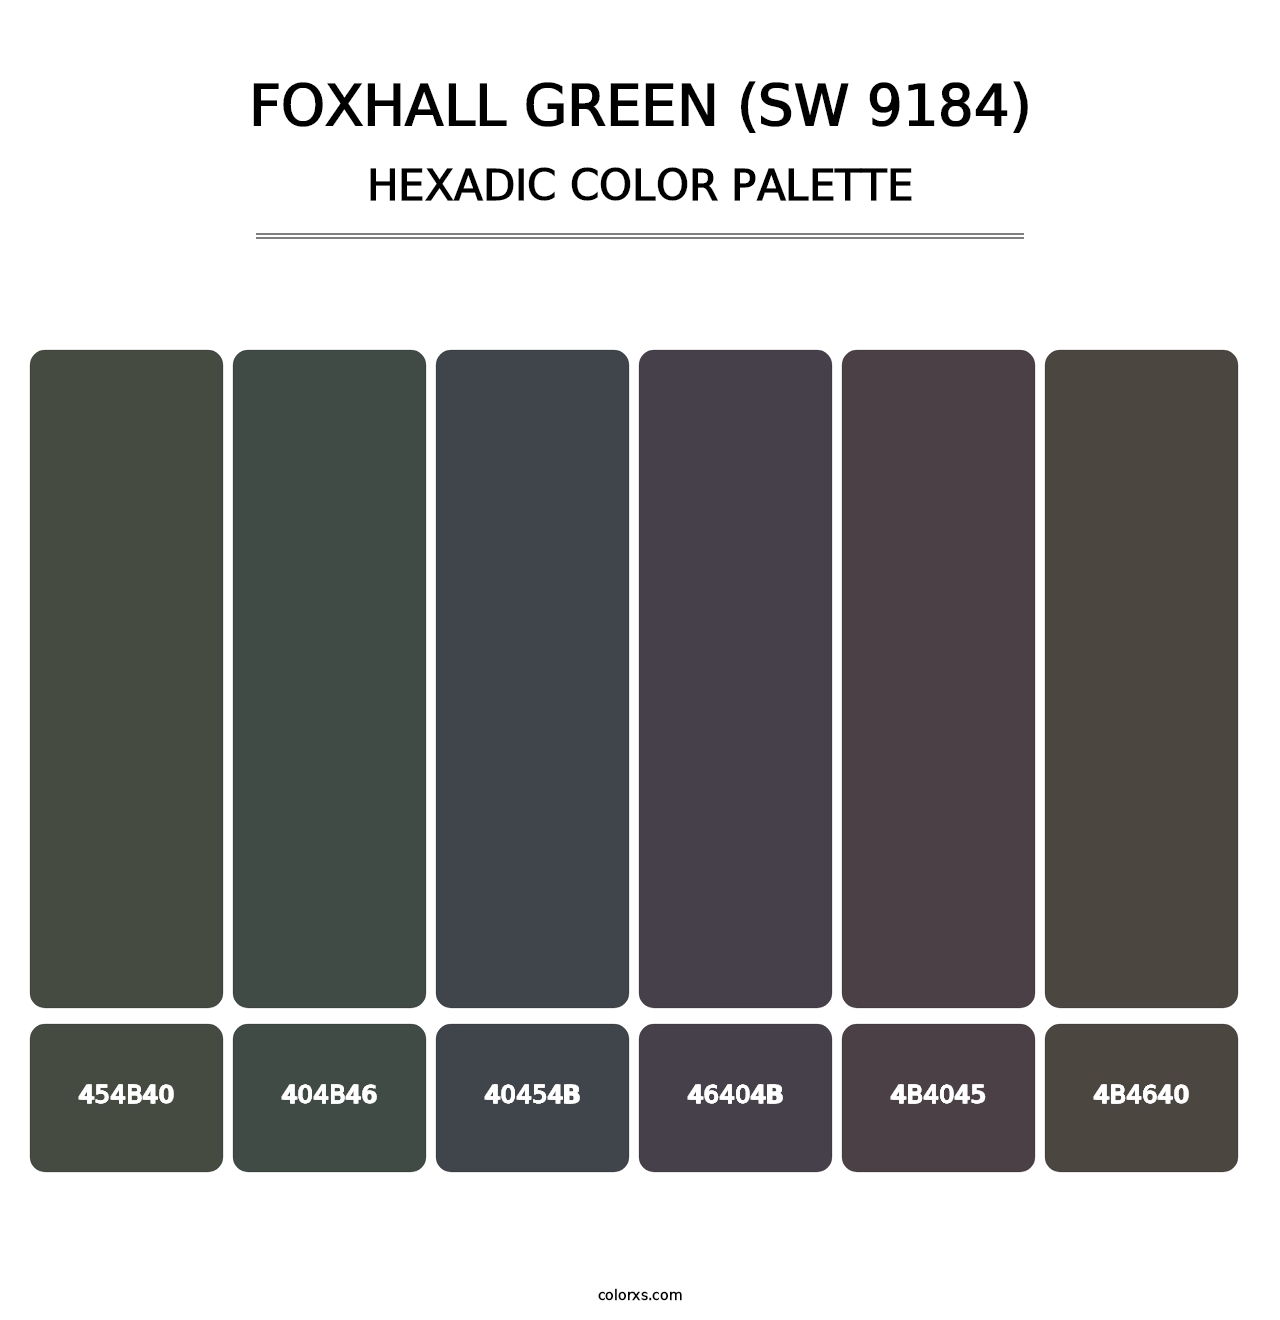 Foxhall Green (SW 9184) - Hexadic Color Palette